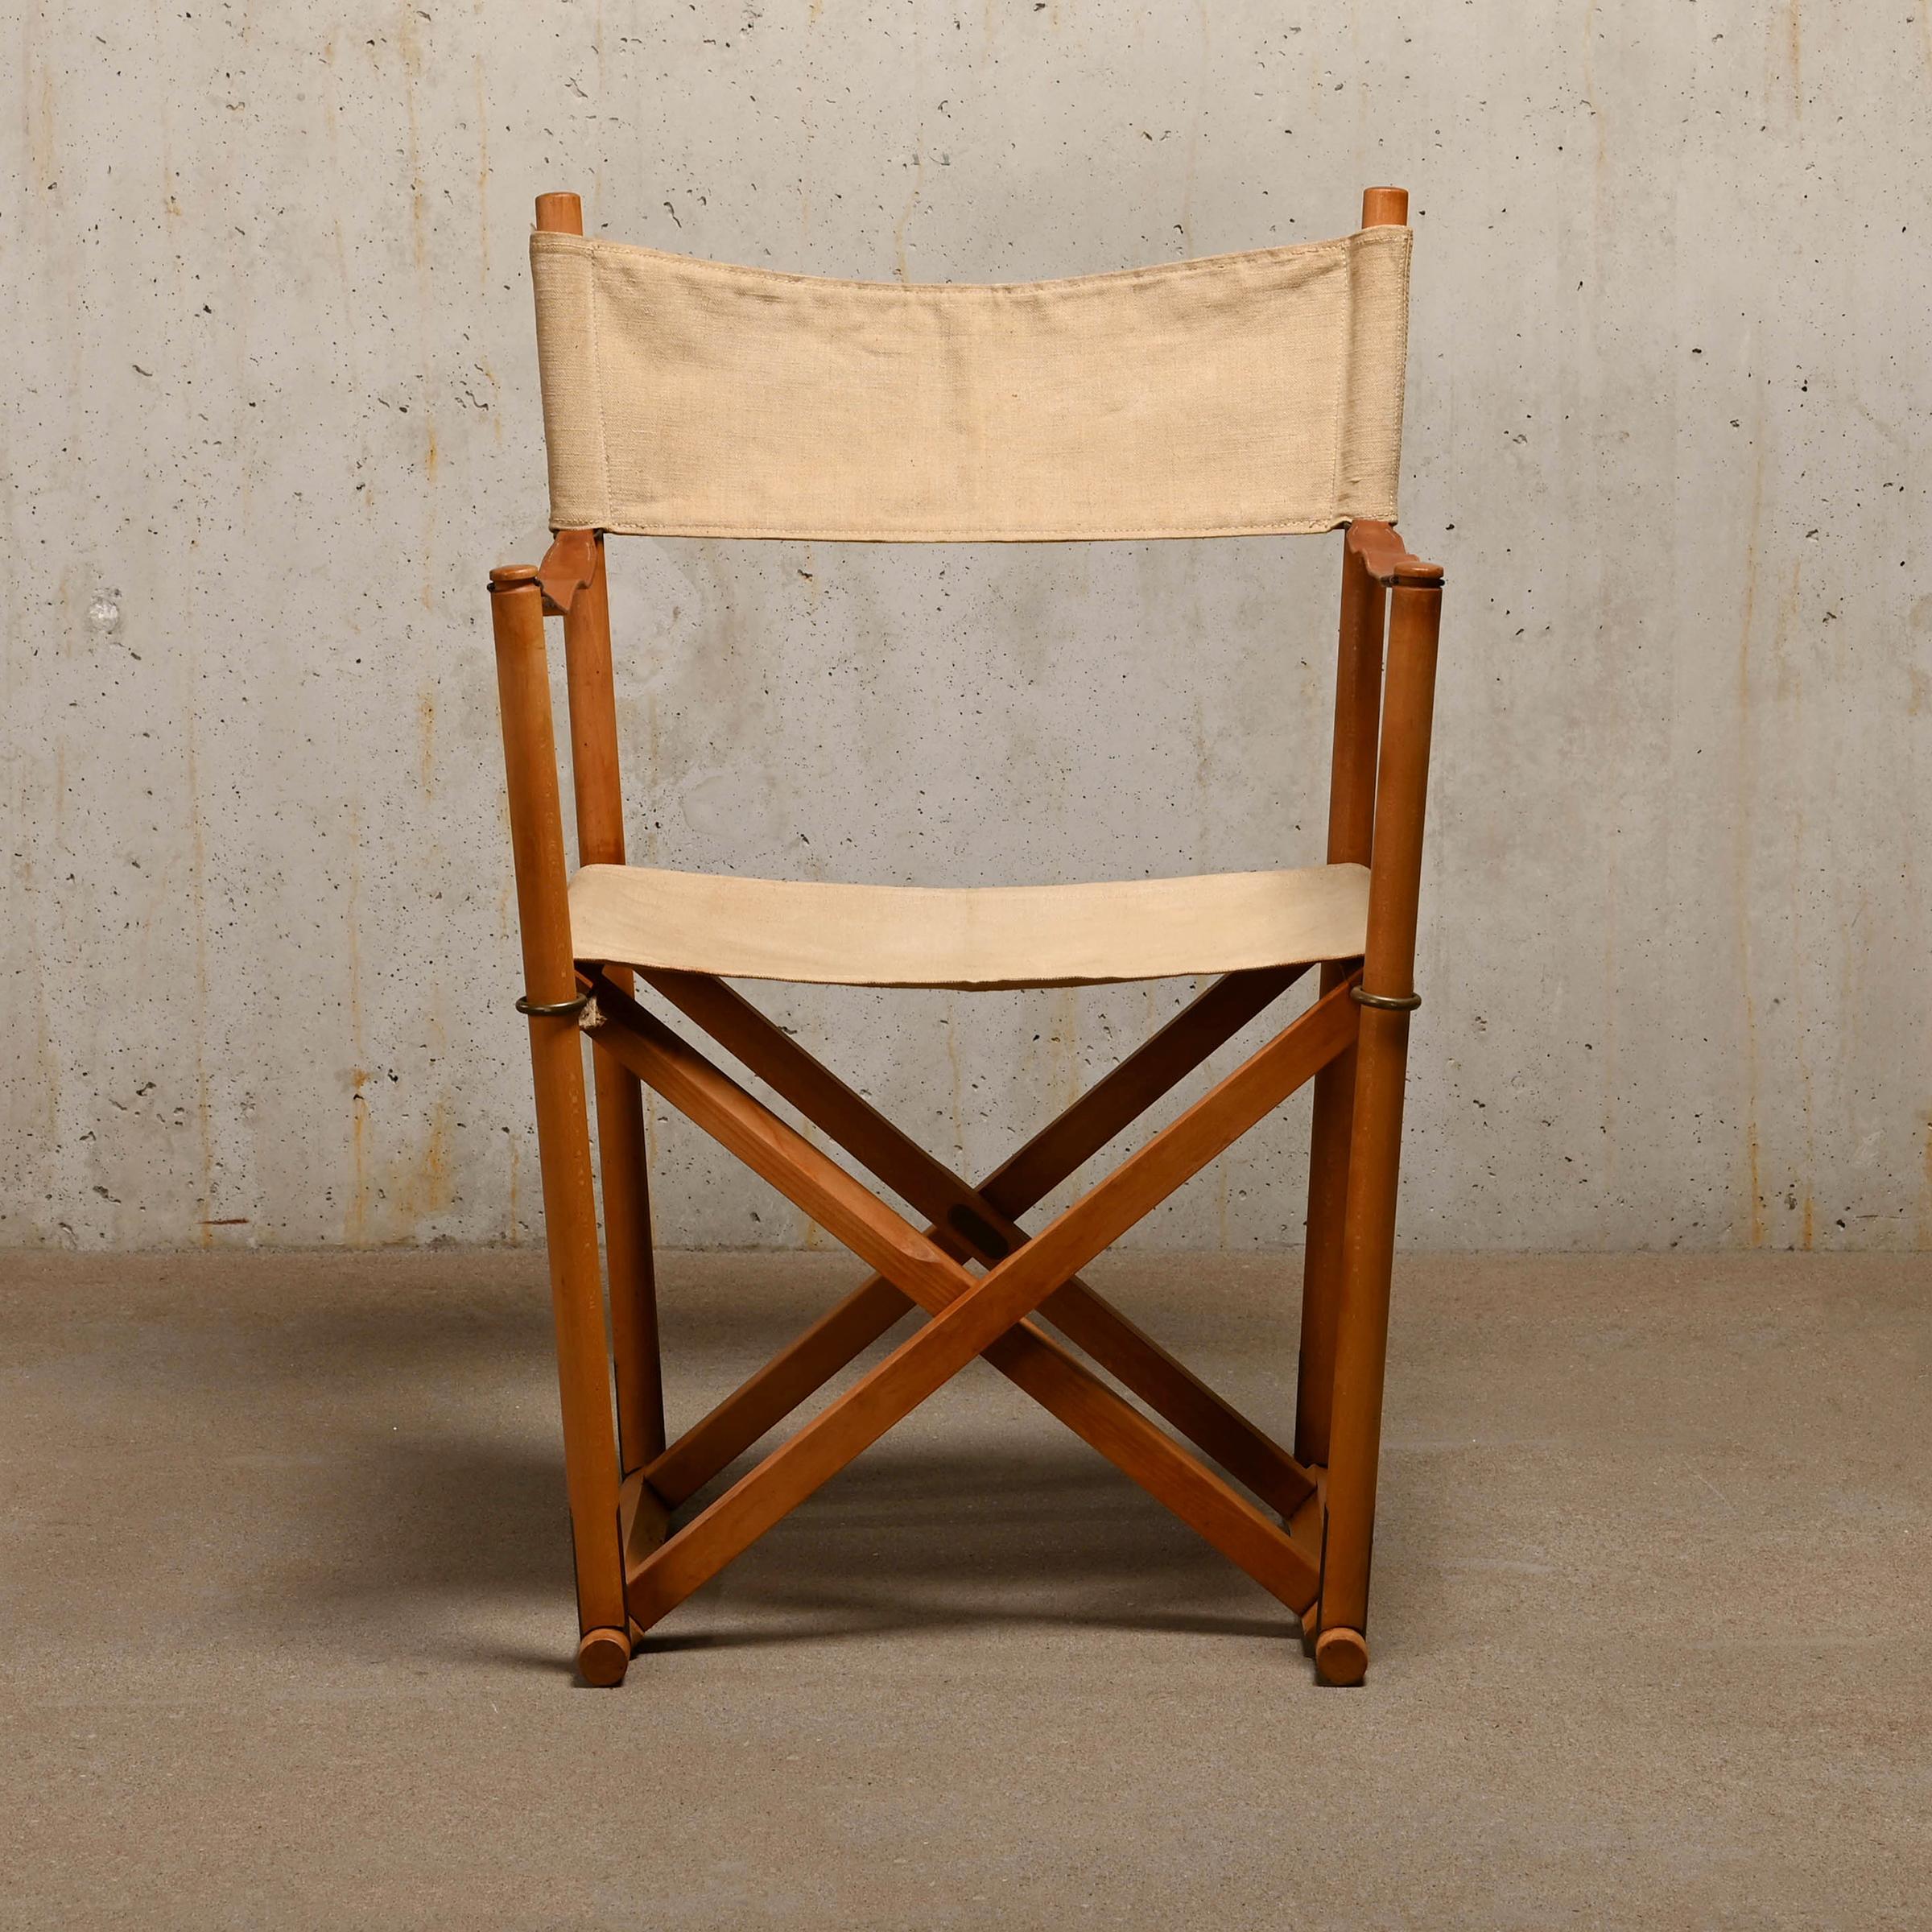 Beautiful made Folding Chair (model MK16) designed by Mogens Koch in the early thirties. This example is manufactured by Interna Denmark and features a beech wood frame with brass fittings and canvas upholstery with full-grain leather straps.